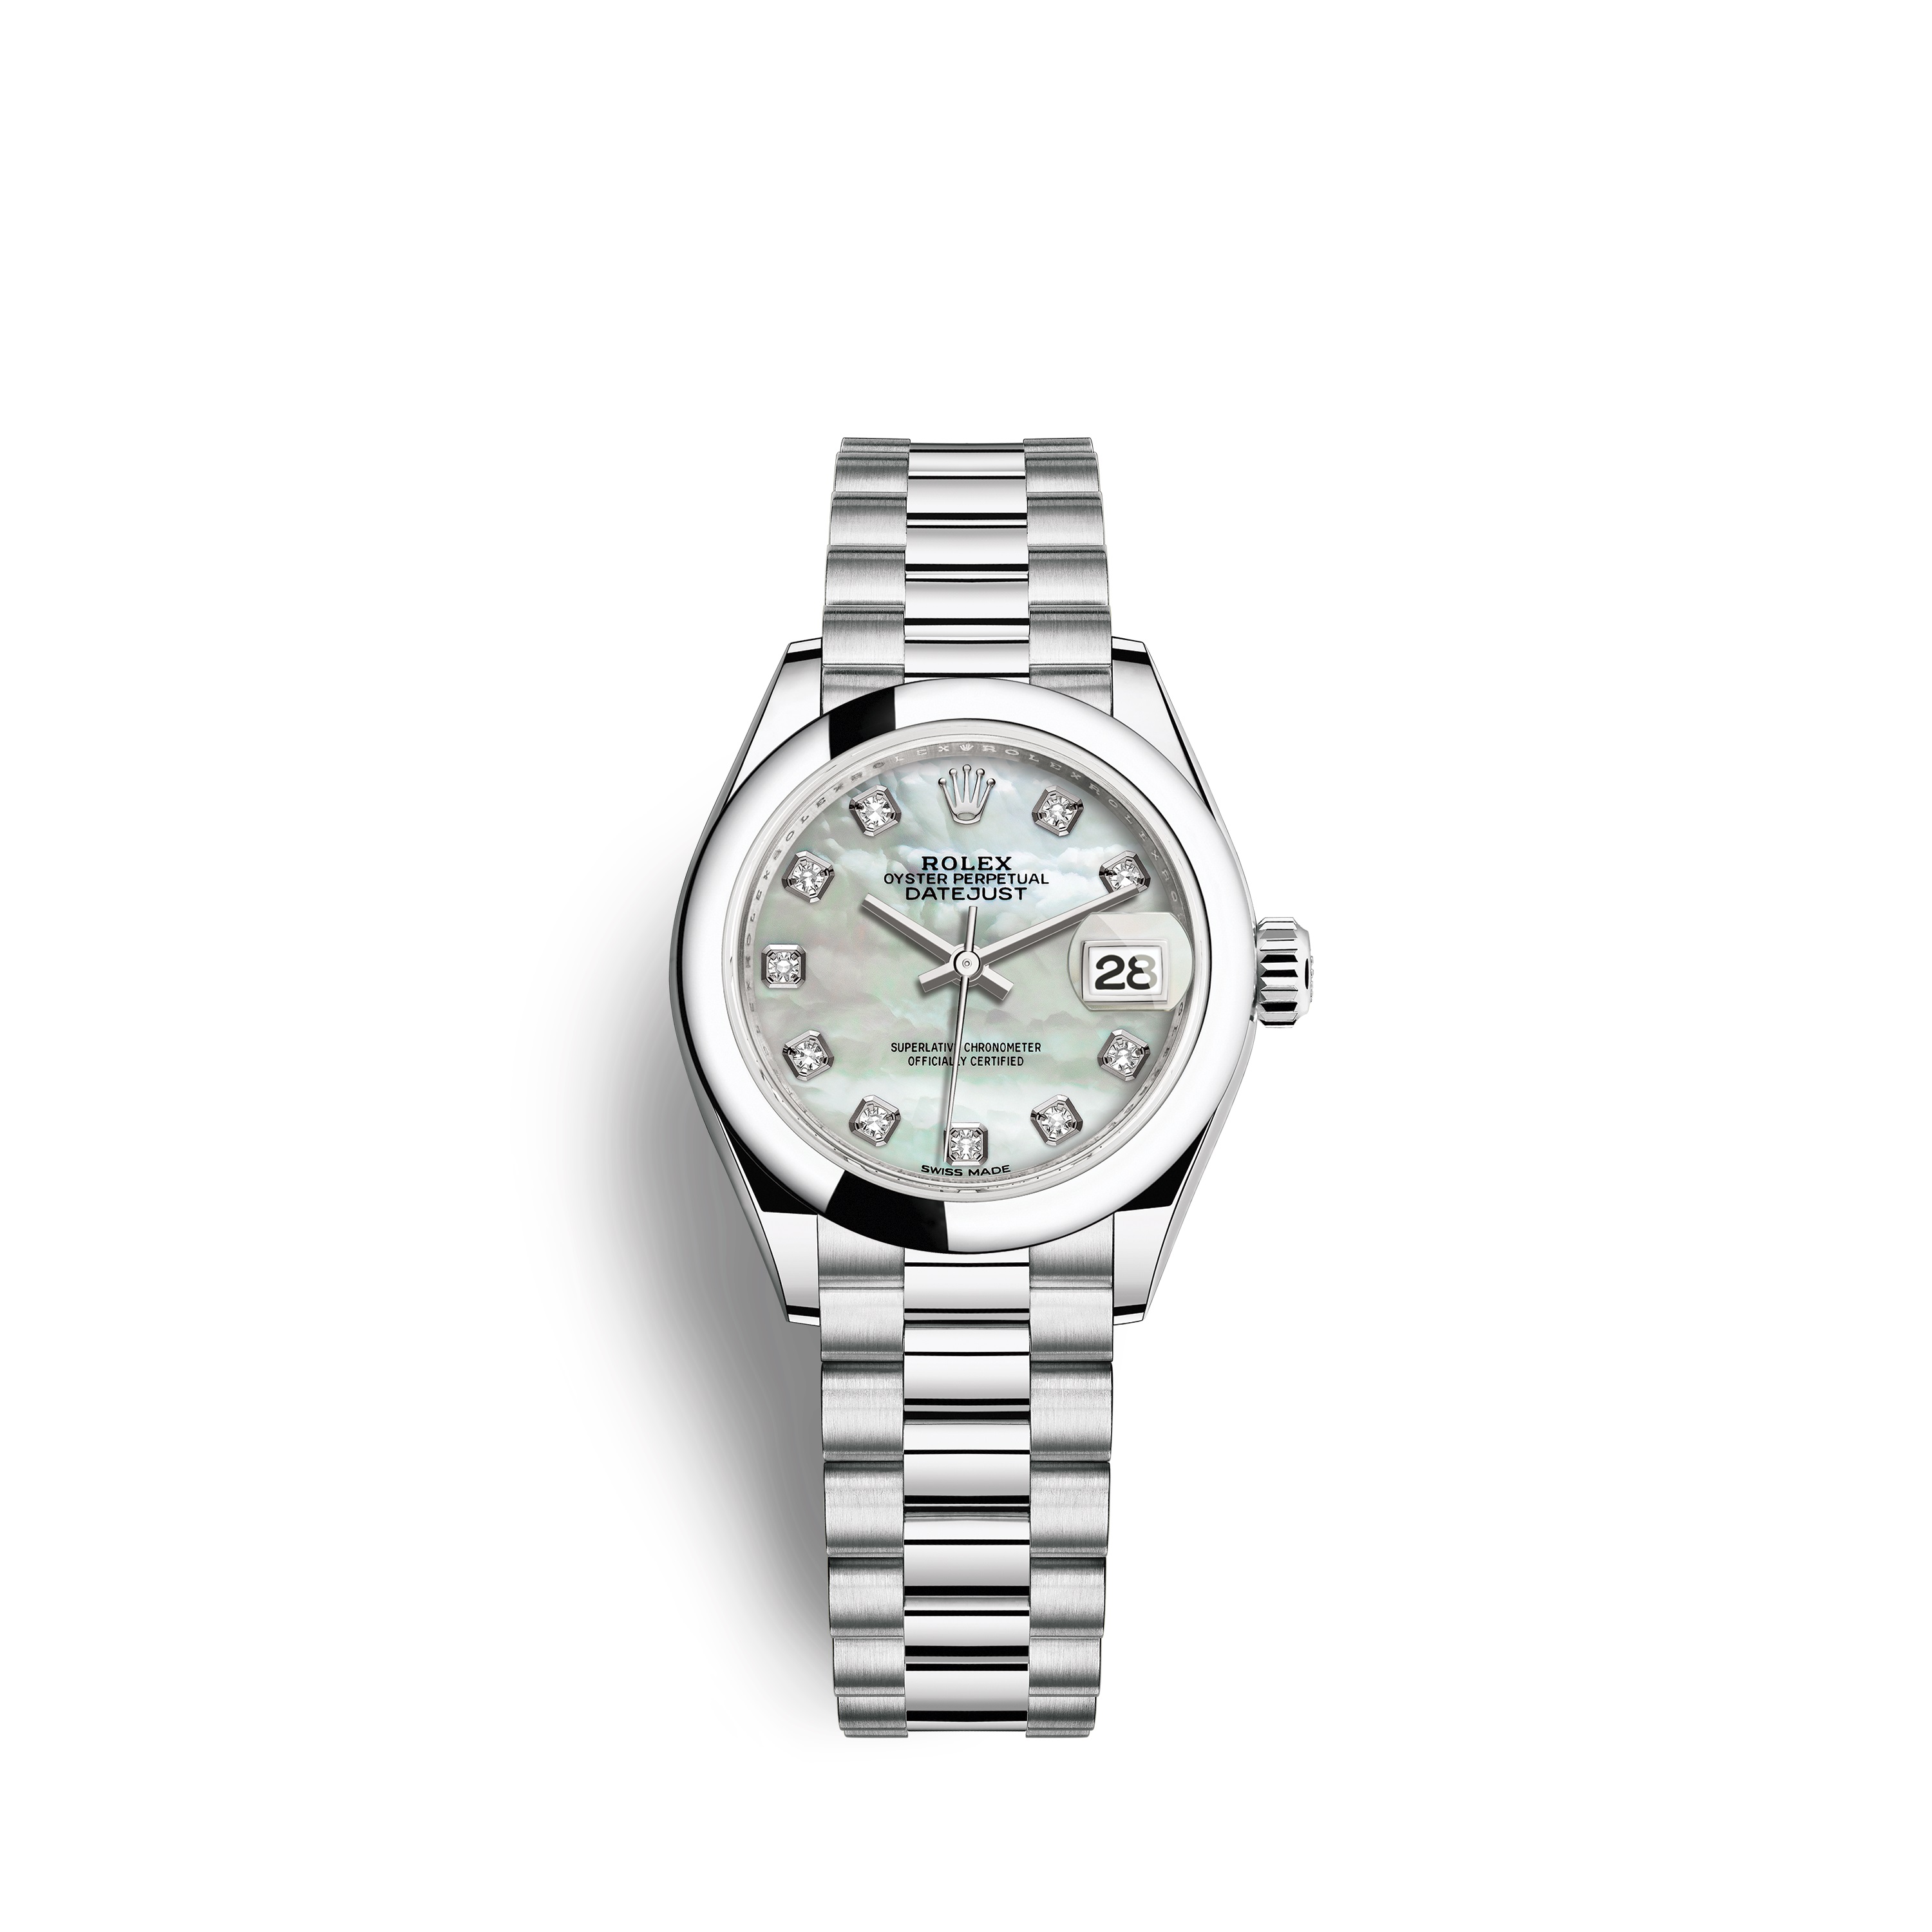 Lady-Datejust 28 279166 Platinum Watch (White Mother-of-Pearl Set with Diamonds)